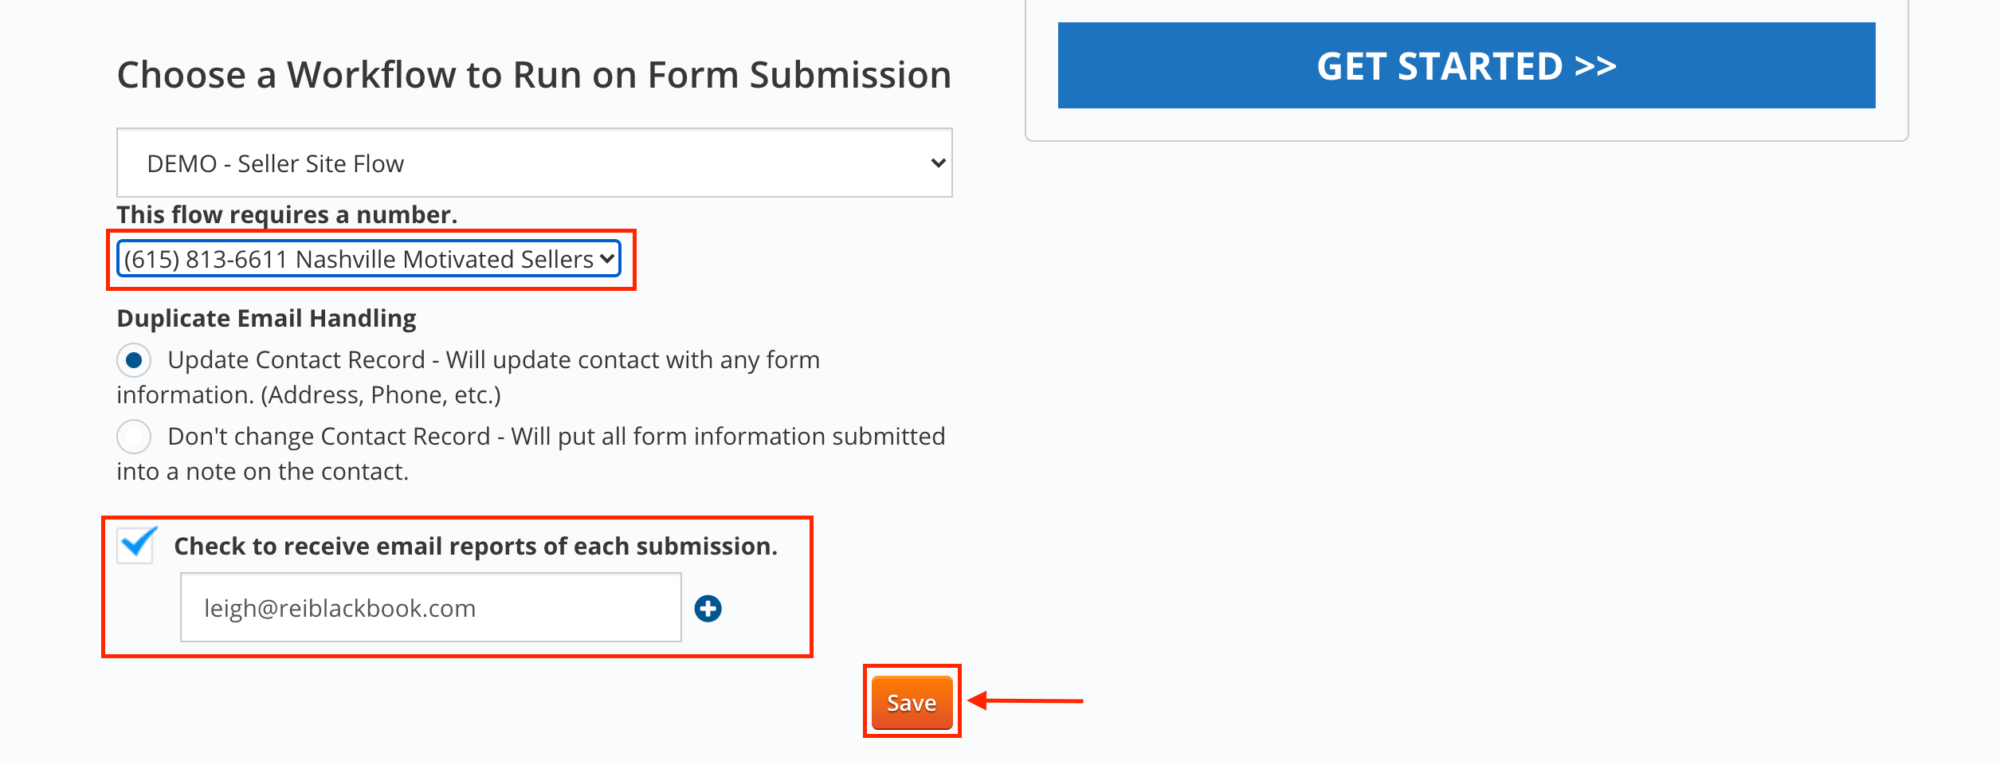 Select a phone number for the workflow and designate any email notifications you'd like to go out when people submit the web form on your real estate investor website.